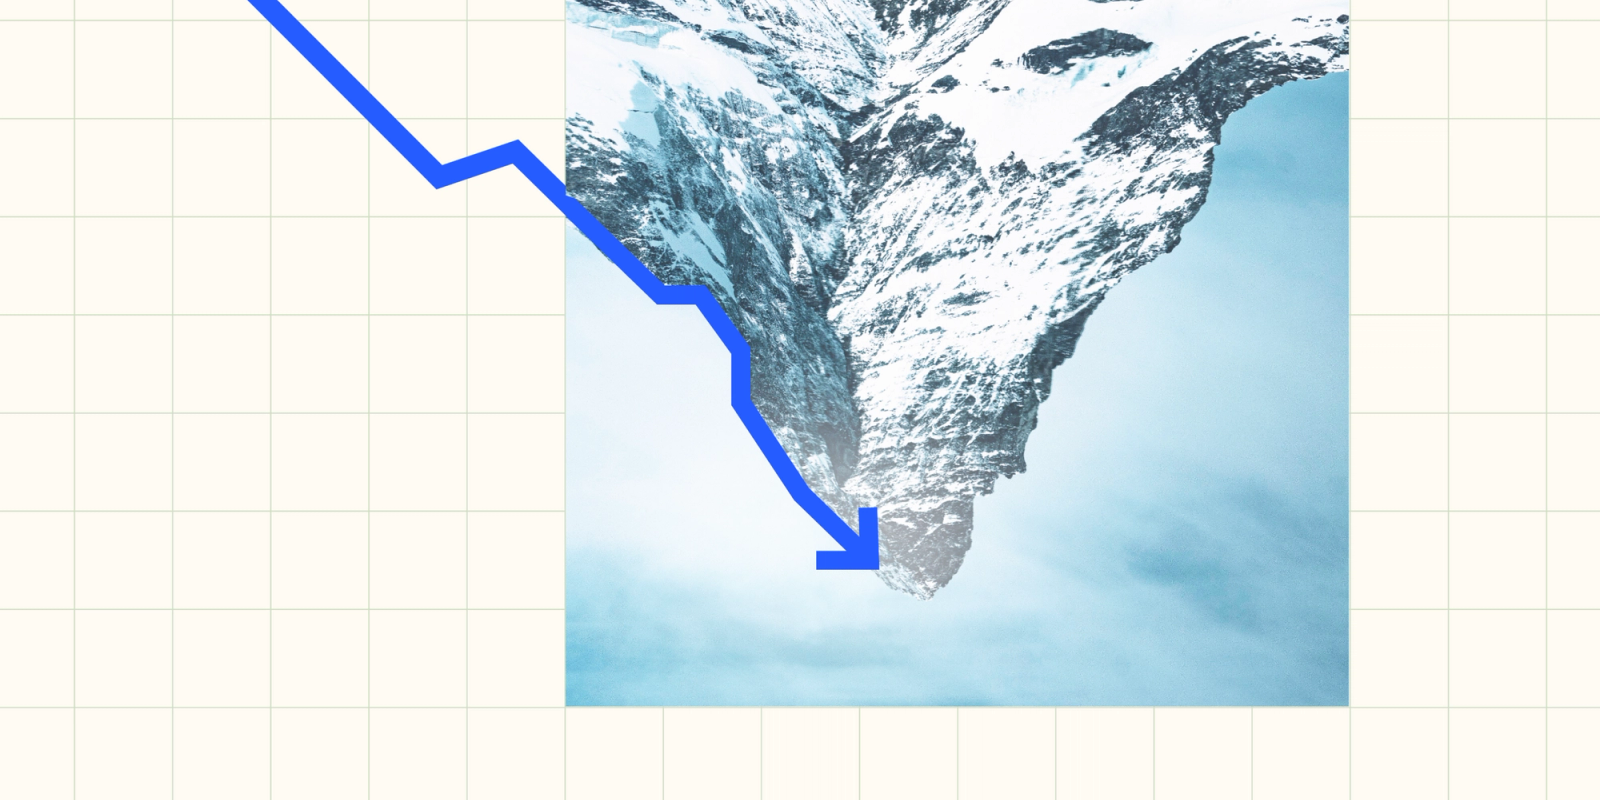 upside down mountain graph - how to build a high-impact climate program